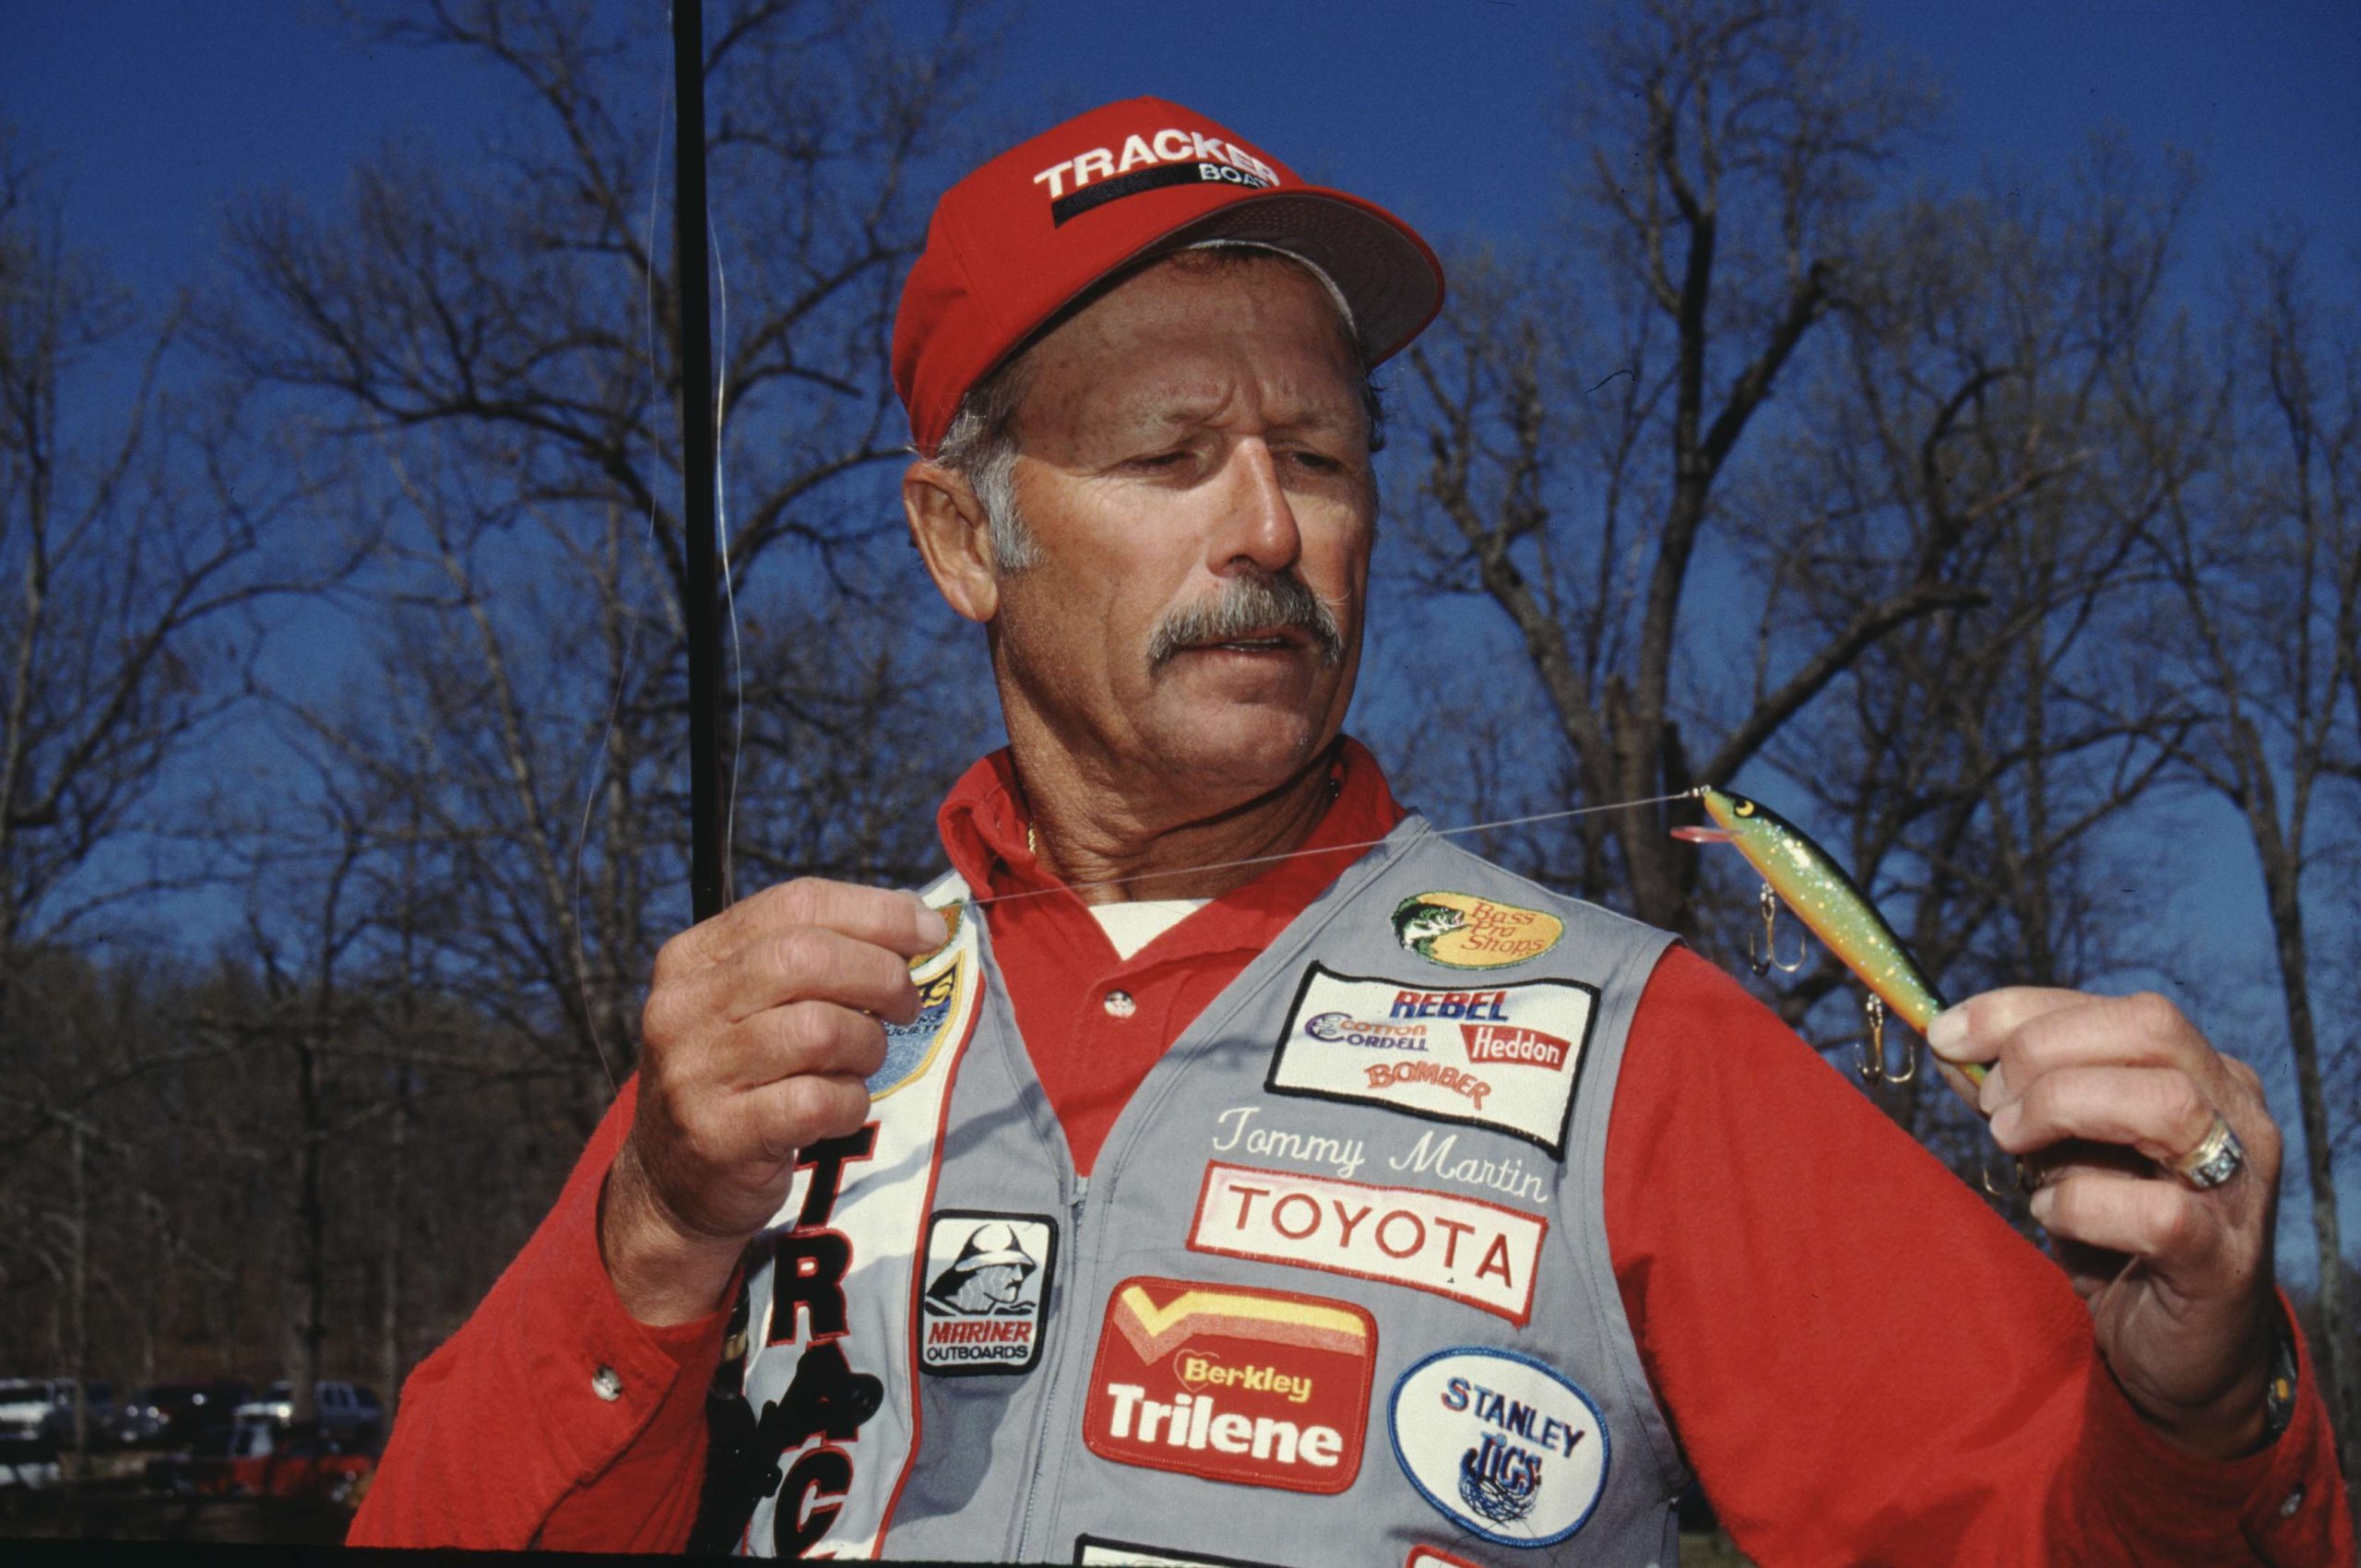 <h4>Tommy Martin</h4><BR>
Martin won the 1974 Classic as a rookie and fished his 19th world championship in 2002, a true testament to his stamina and passion for professional bass fishing. He was a mentor to Nixon and other young pros. Today he still guides on Toledo Bend and competes in the Bass Pro Shops Bassmaster Opens. 
